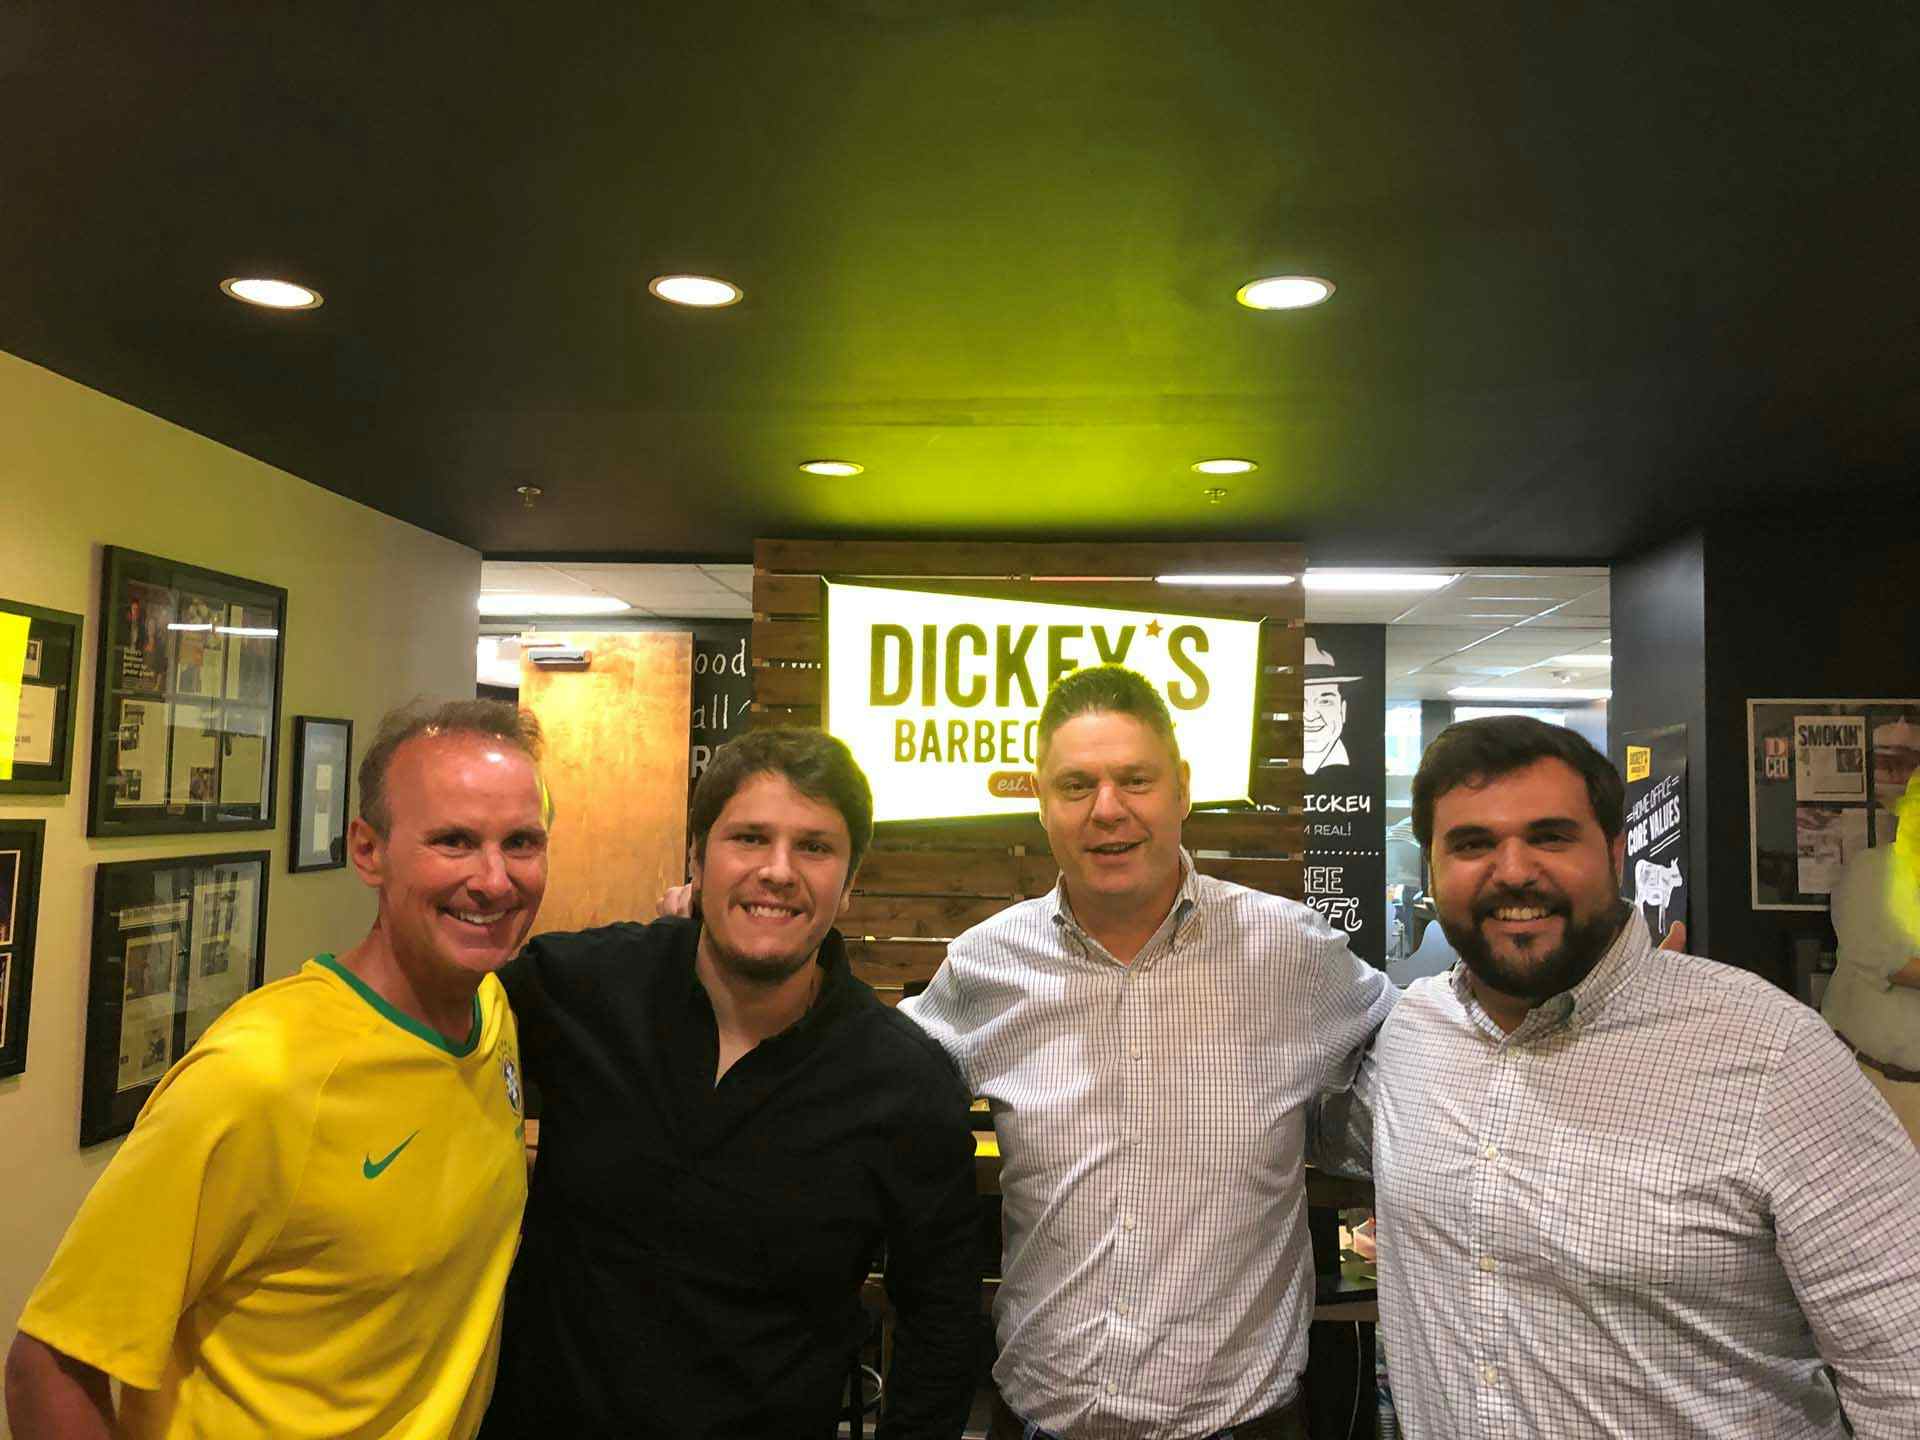  Dickey’s Barbecue Pit Headed South of the Equator